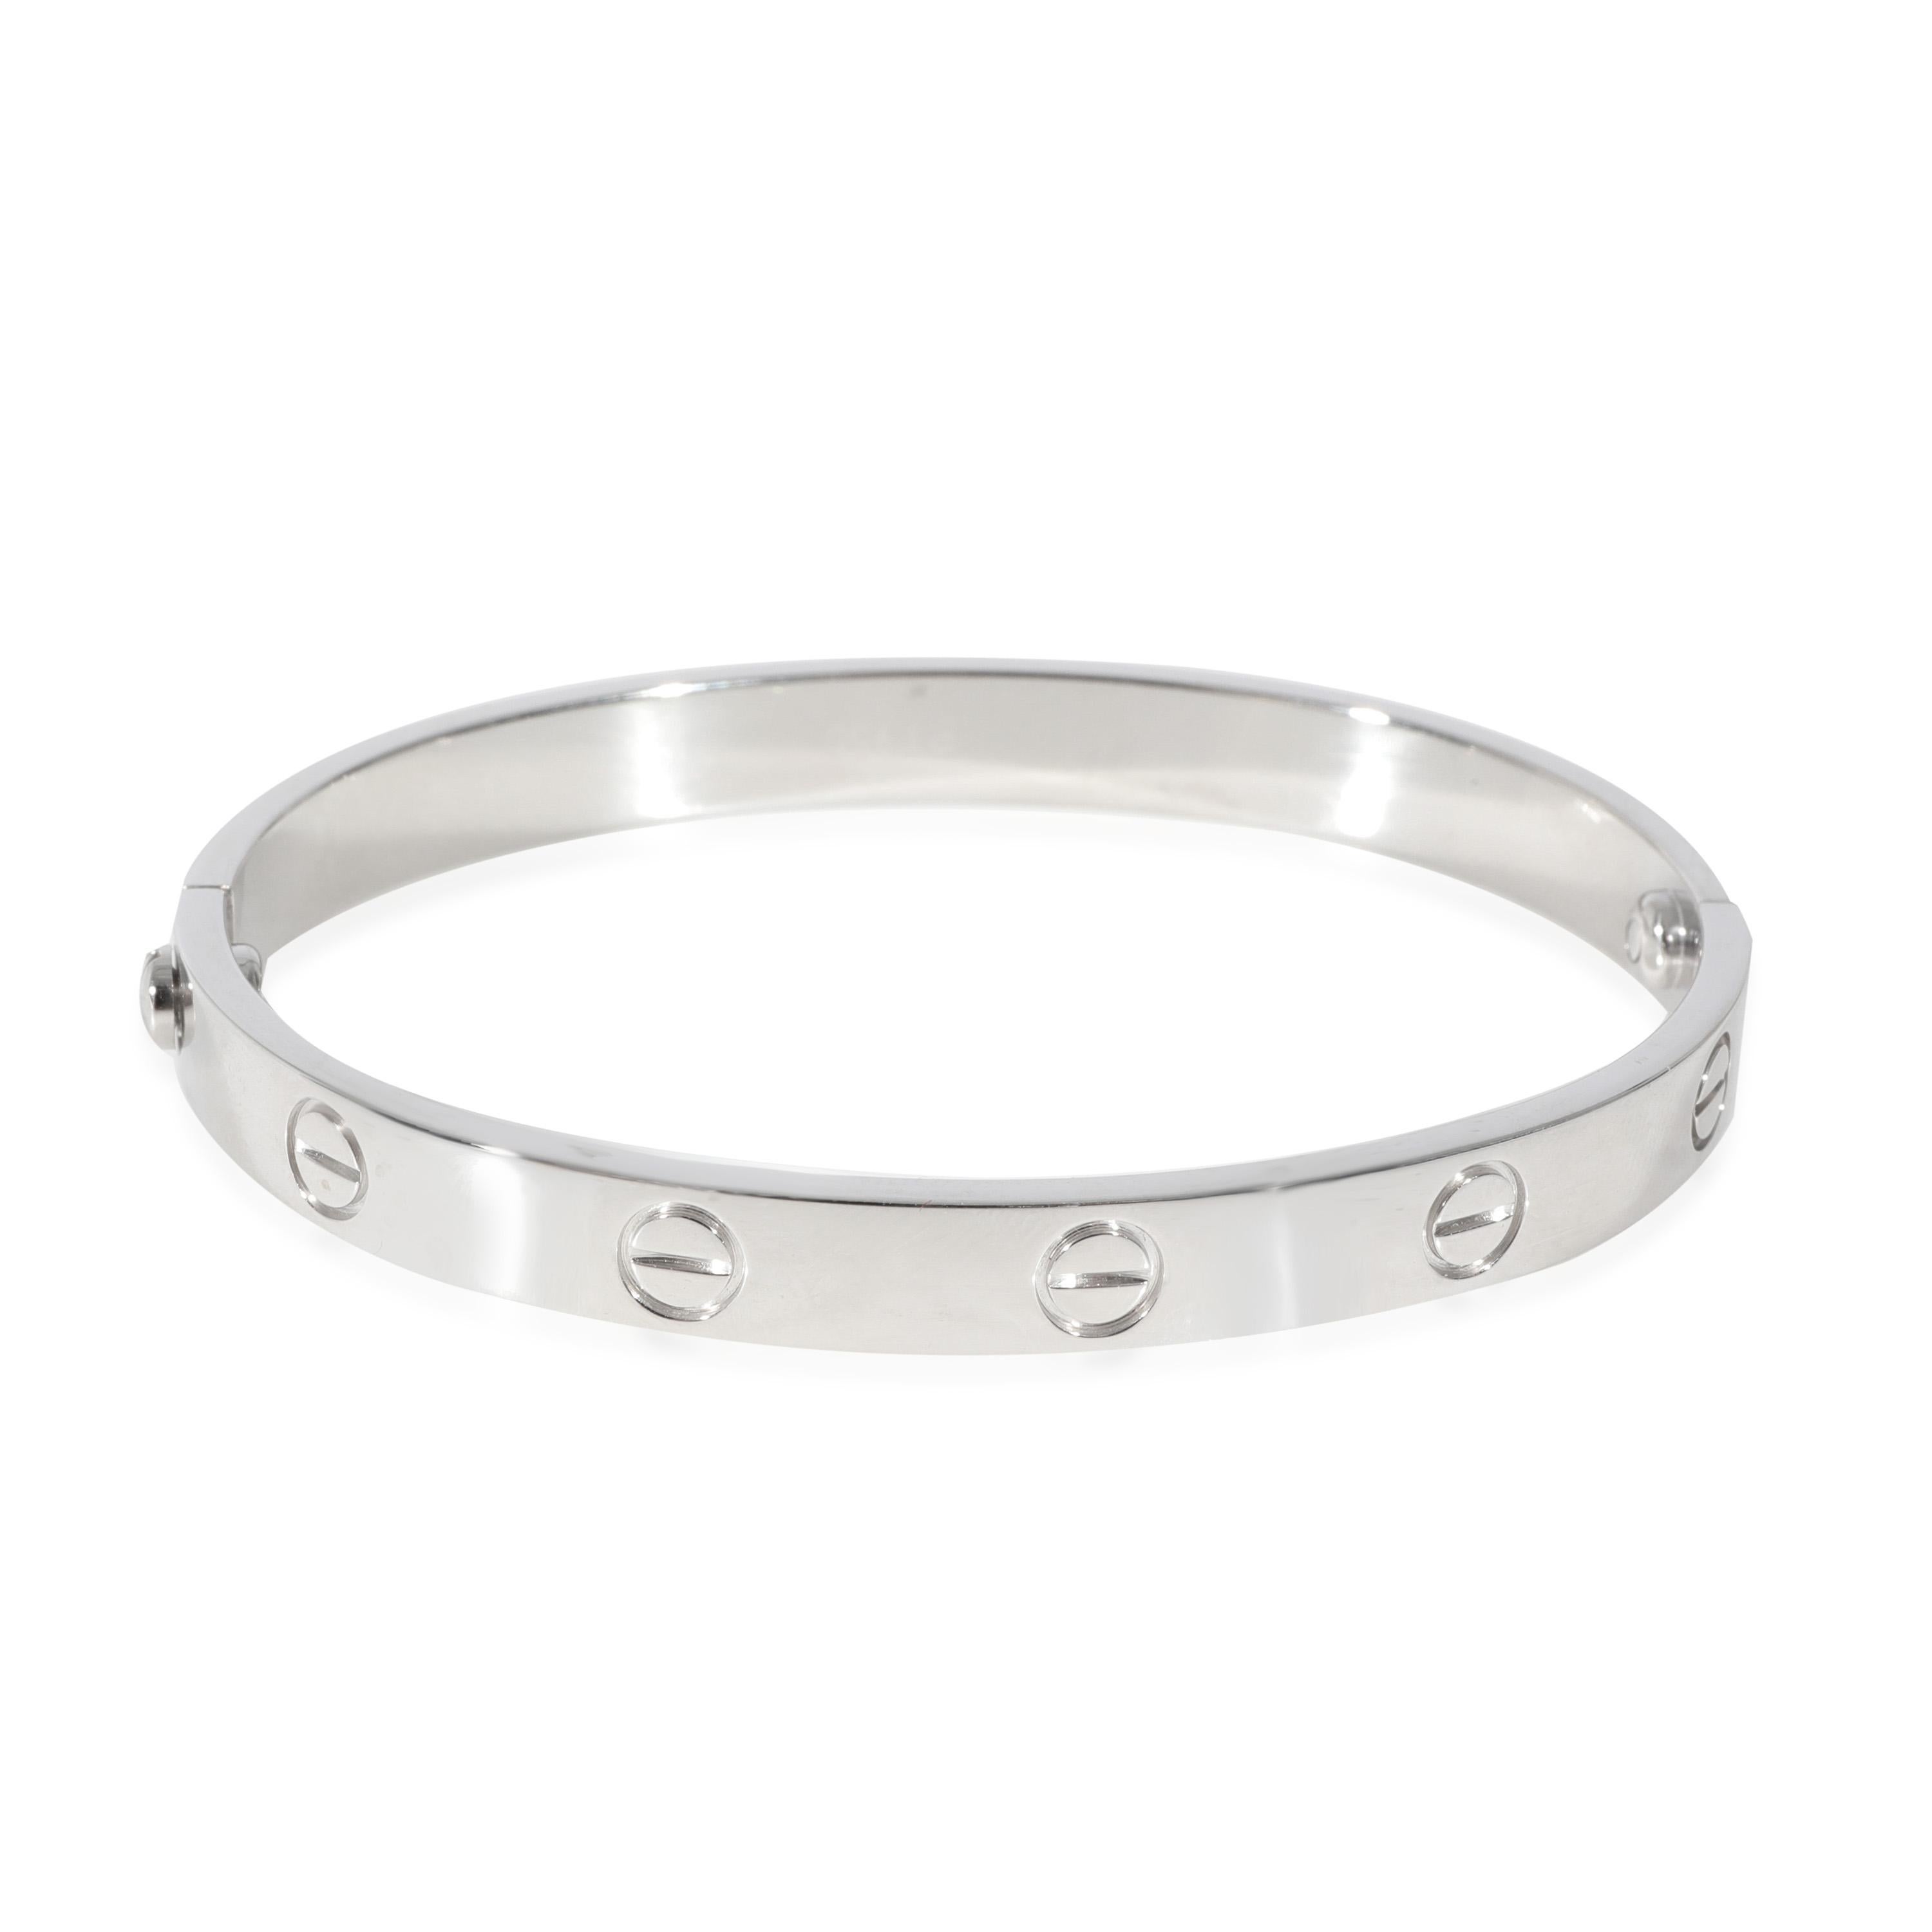 Cartier Love Bracelet in Platinum
 
 PRIMARY DETAILS
 SKU: 128474
 Listing Title: Cartier Love Bracelet in Platinum
 Condition Description: Cartier's Love collection is the epitome of iconic, from the recognizable designs to the history behind the